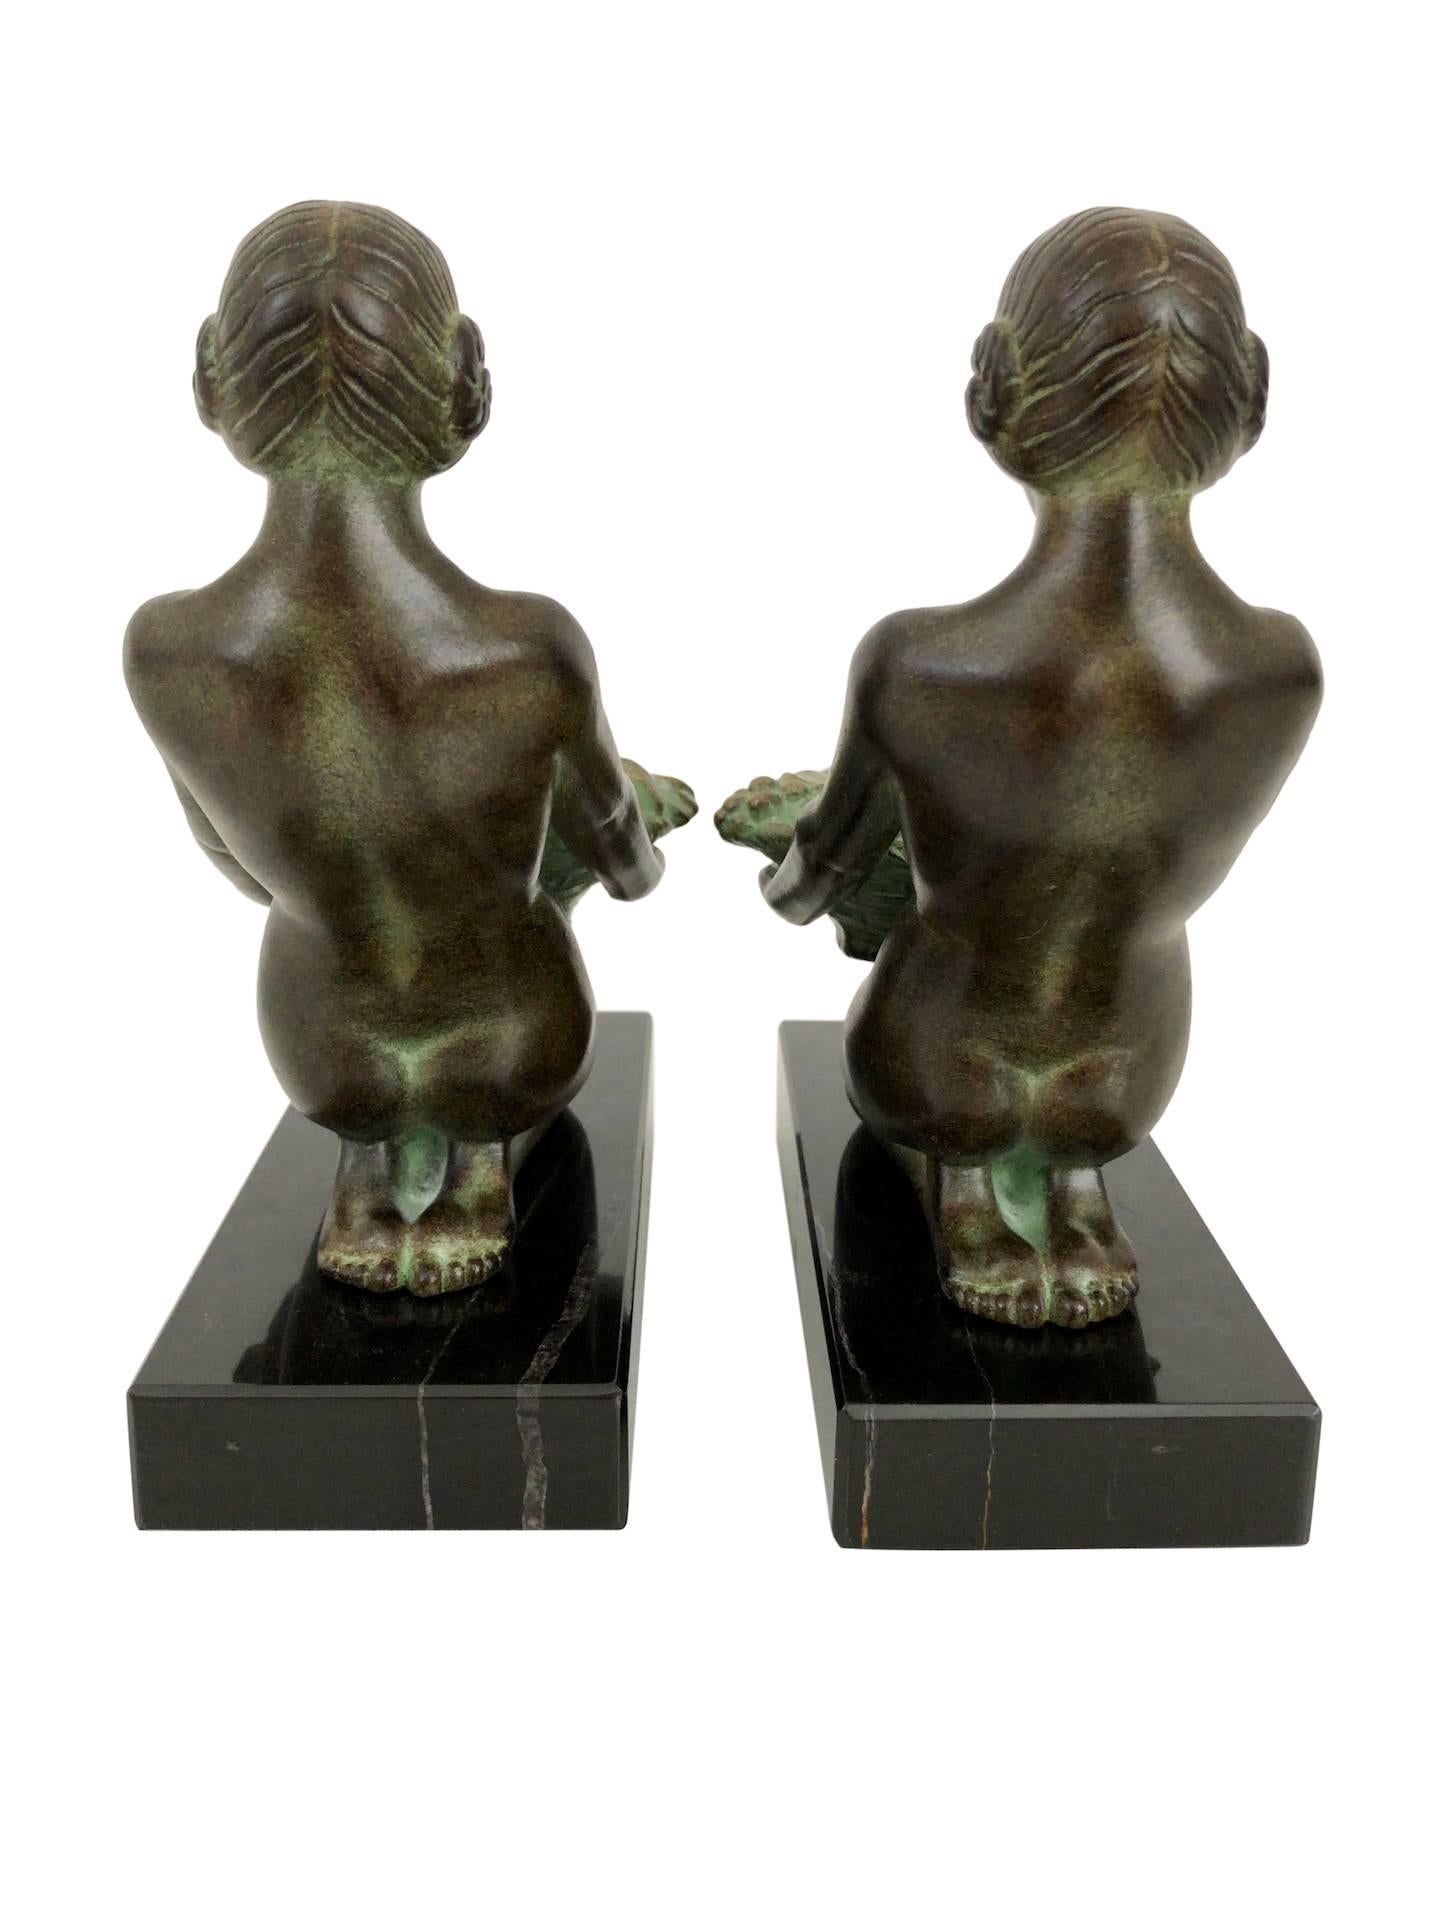 Original Max Le Verrier Cueillette Art Deco Style Bookends in Spelter and Marble 1